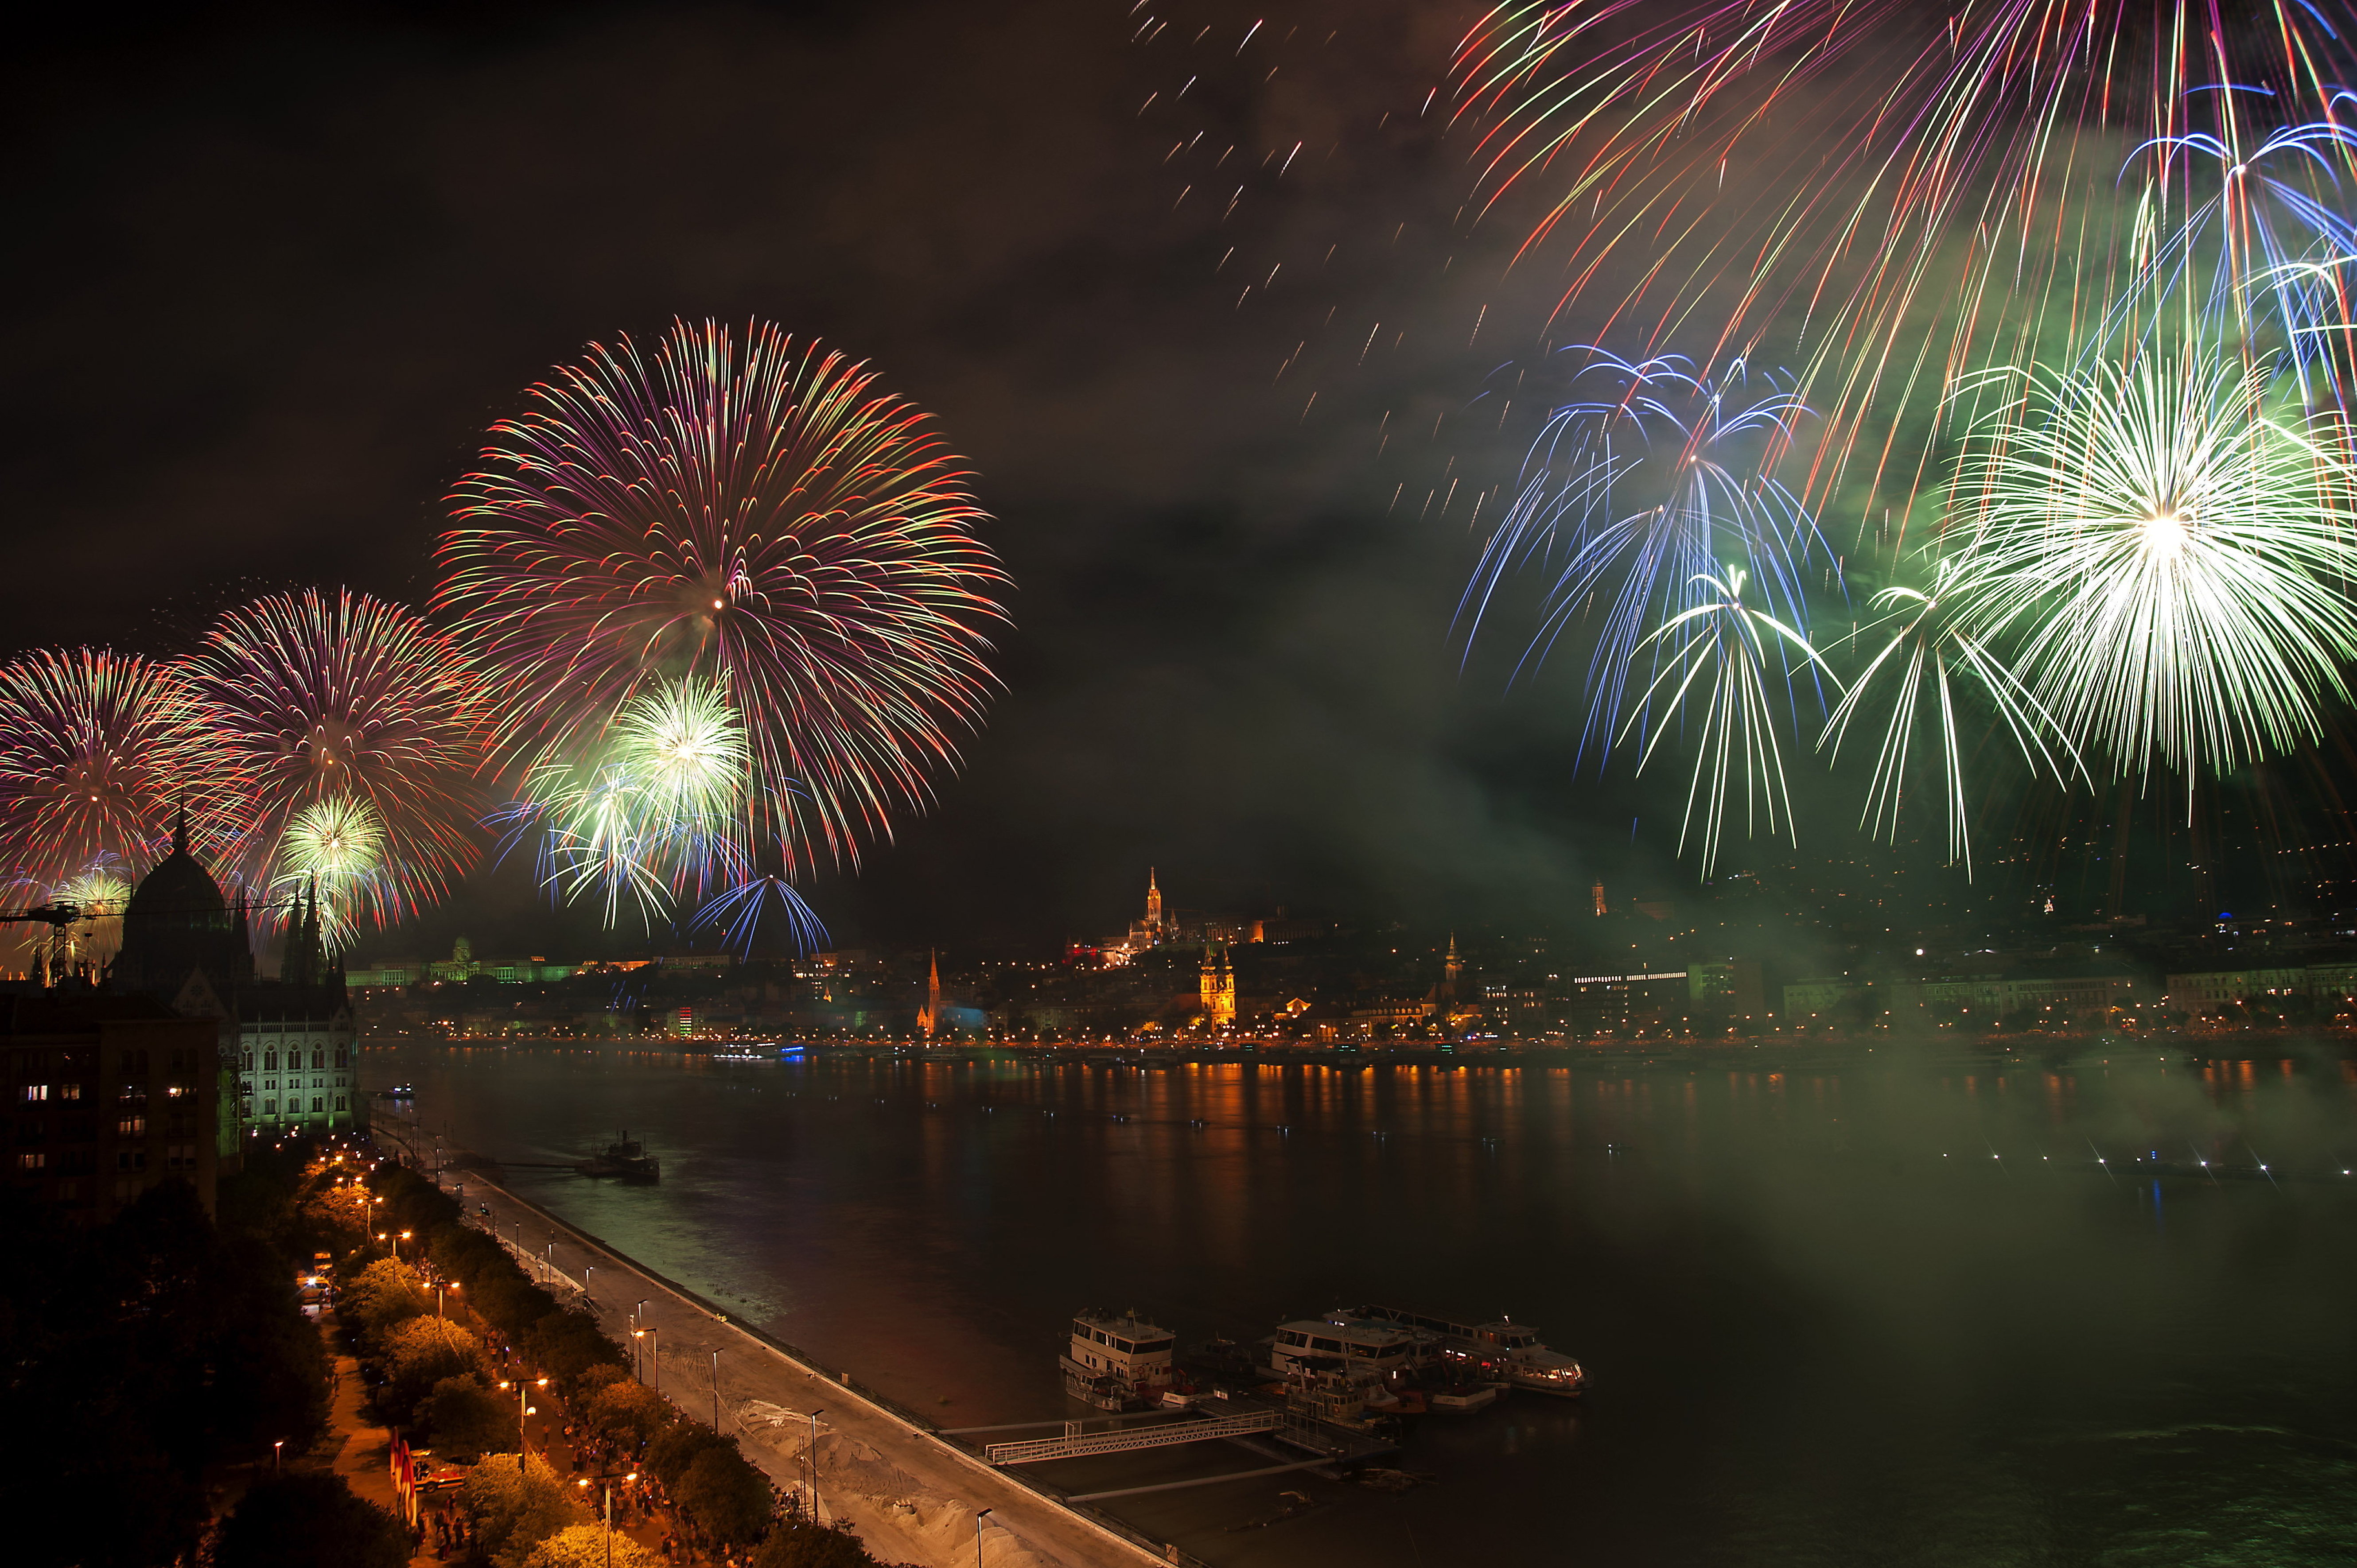 Budapest to Offer 12 Venues With St. Stephen's Day Programs